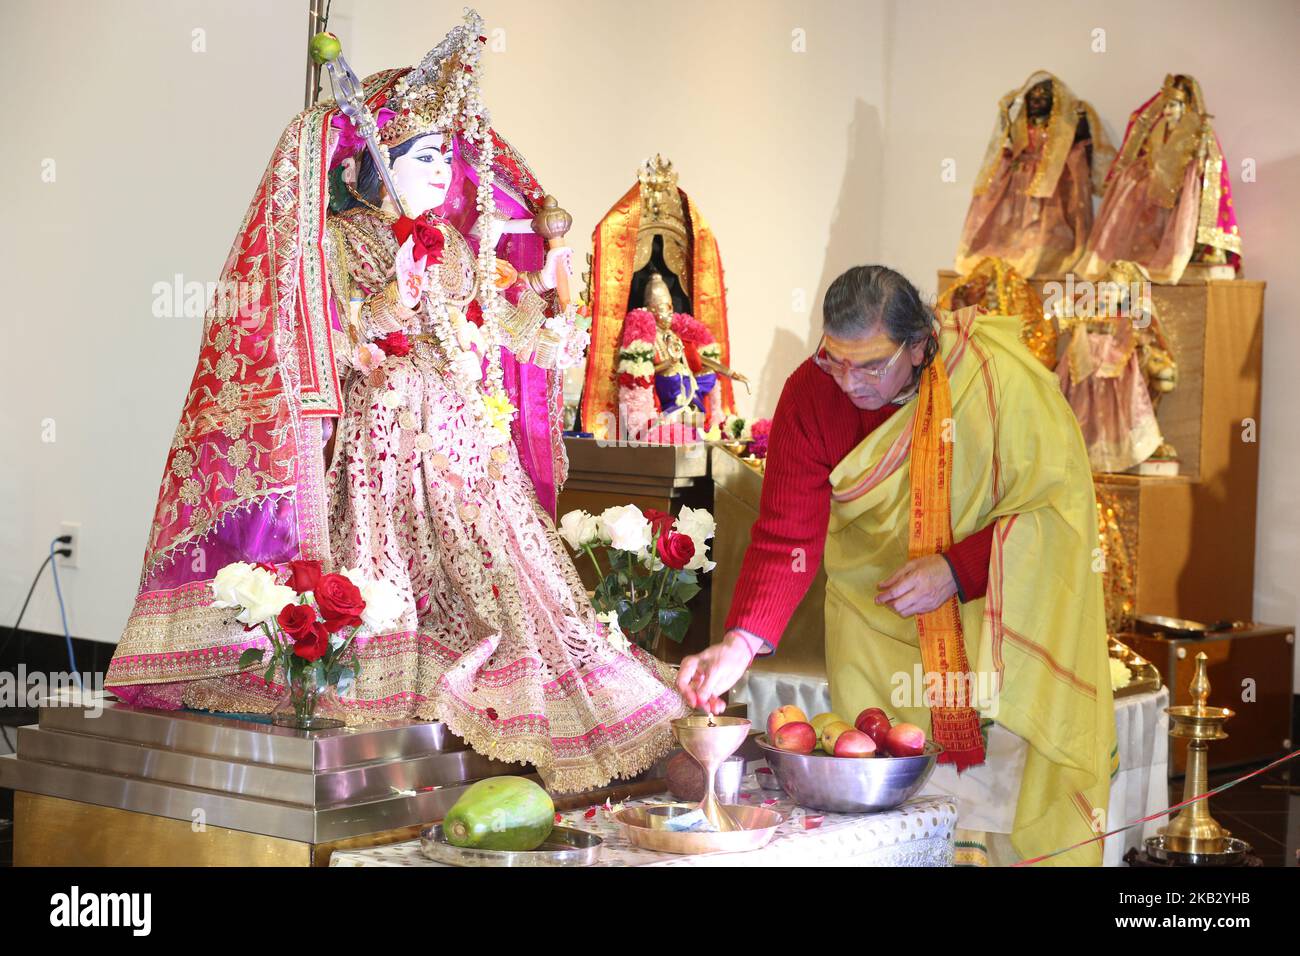 Hindu priest performs prayers during the festival of Diwali (Deepawali) at a Hindu temple in Toronto, Ontario, Canada on November 7, 2018. Lakshmi (Laxmi) is the Hindu Goddess of wealth and prosperity. (Photo by Creative Touch Imaging Ltd./NurPhoto) Stock Photo